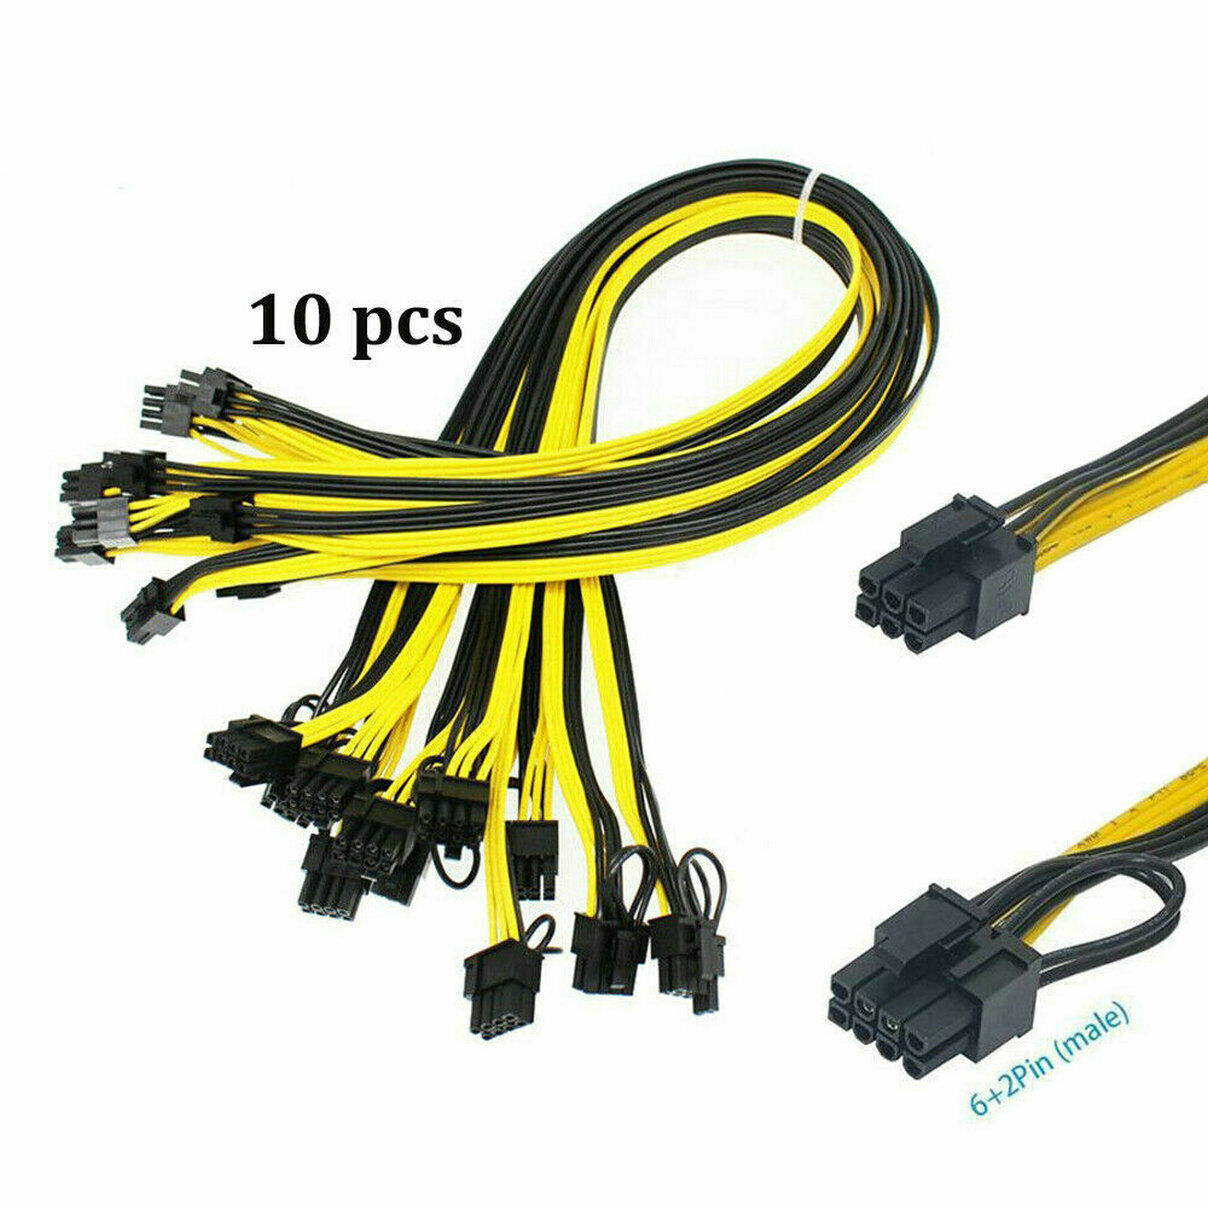 10x 50cm Quality Breakout Cable 6Pin to 8Pin (6+2Pin) PCI-E Cable 18AWG Mining